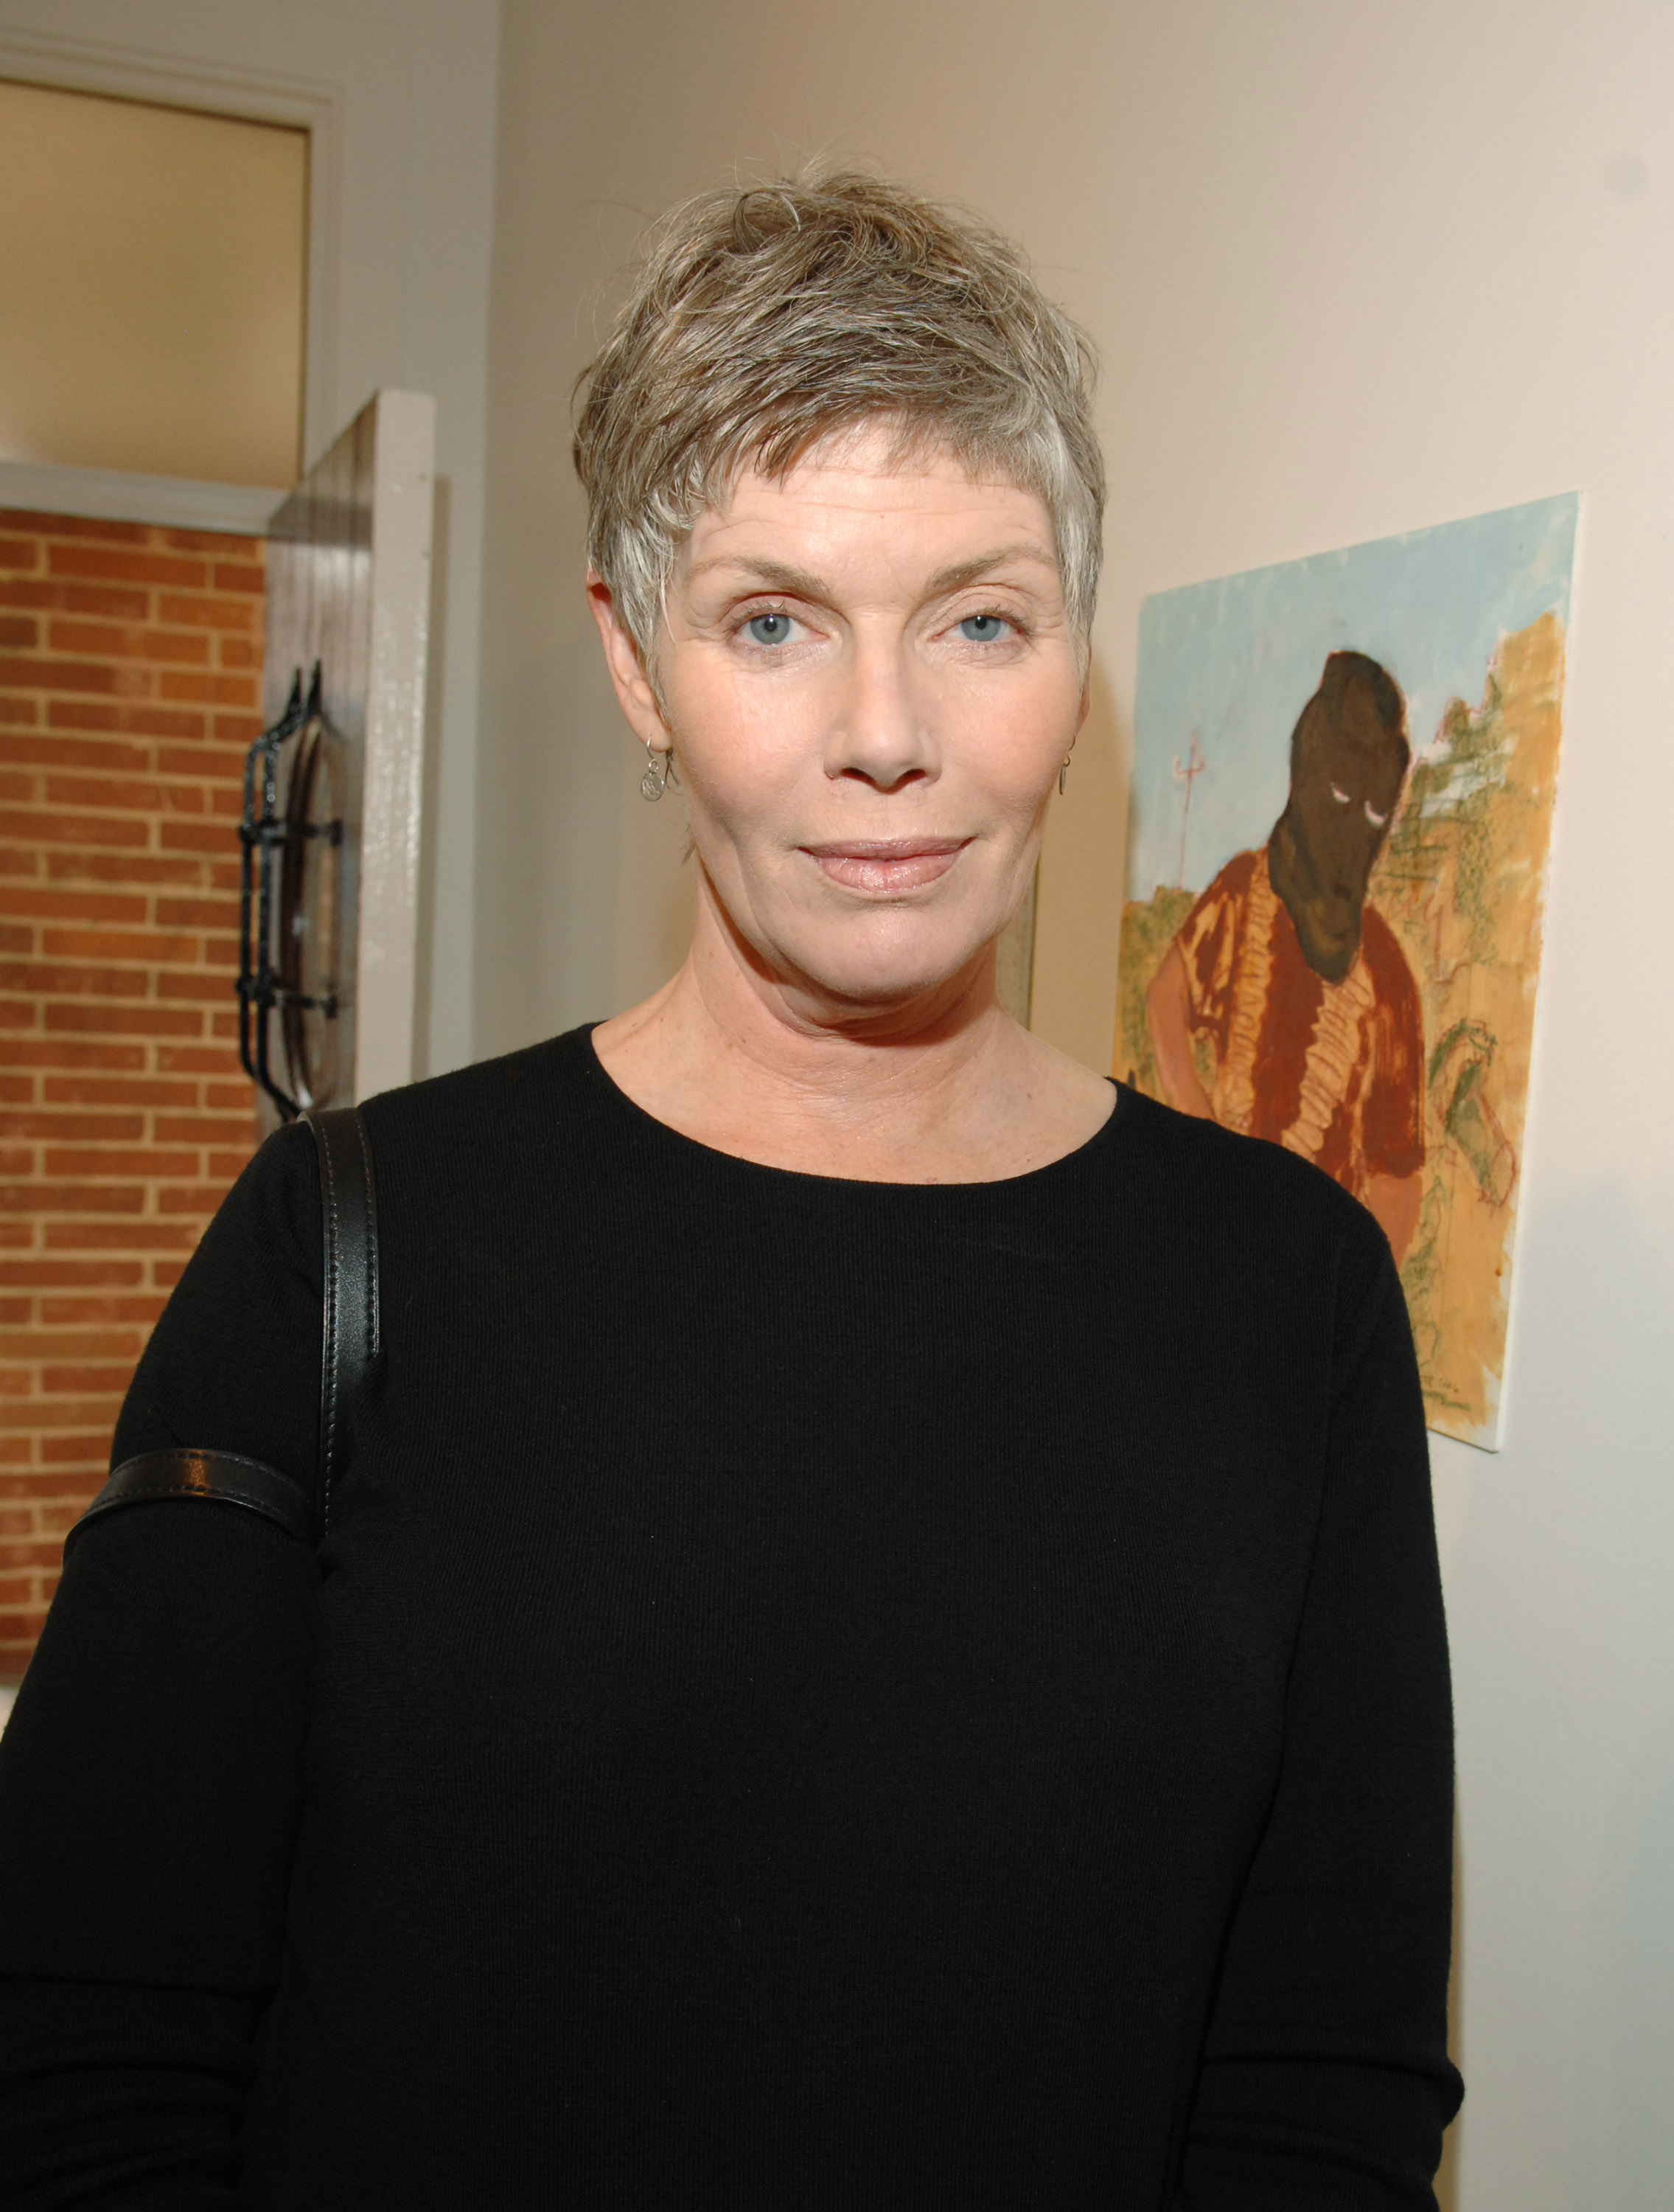 The actress at the Paintings by Mary Lambert Art Show on April 7, 2007. | Source: Getty Images